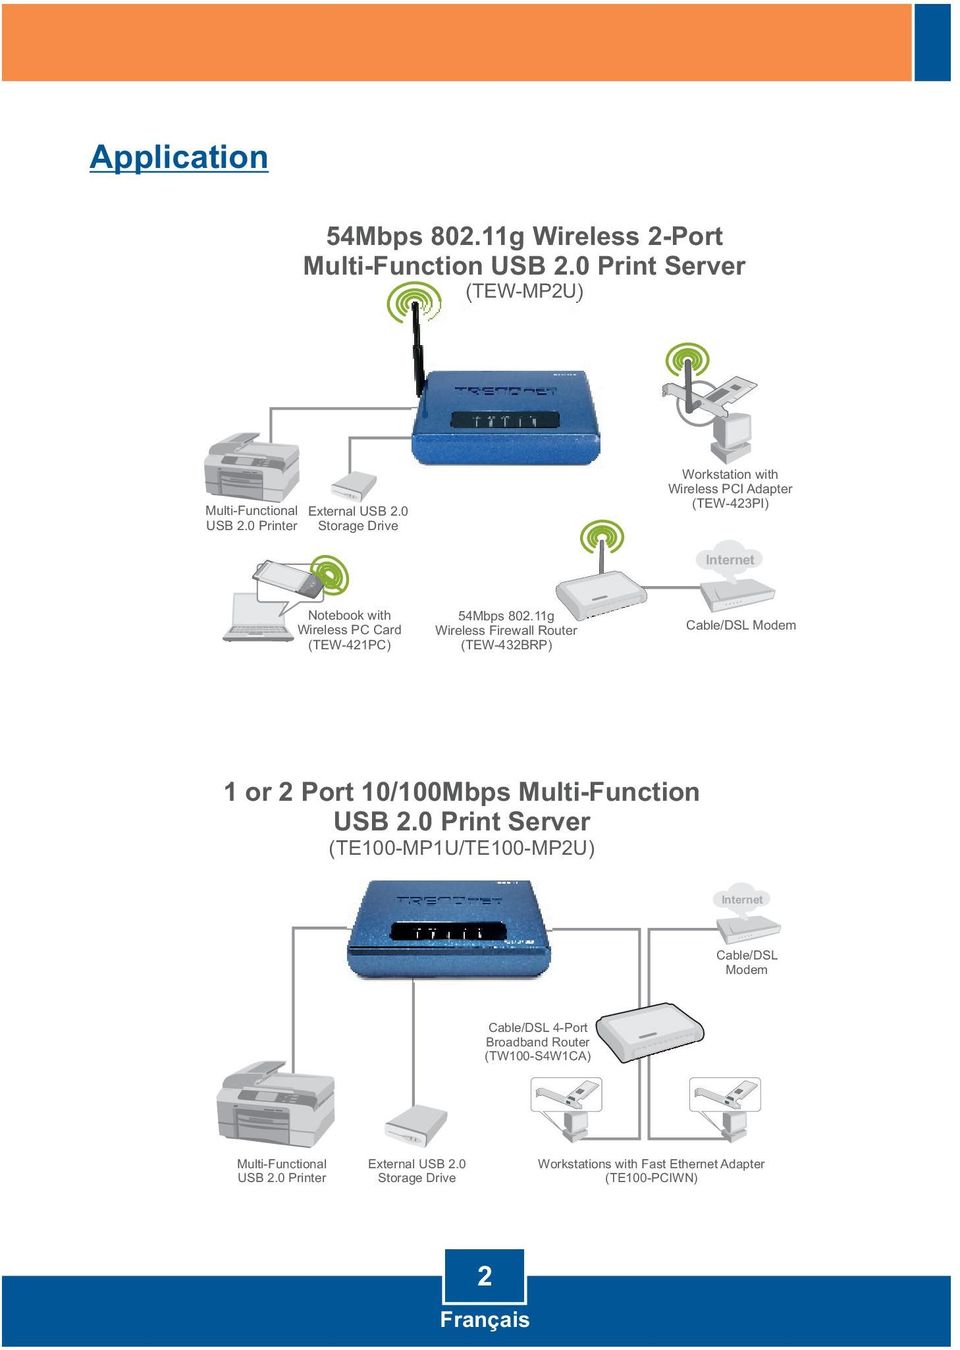 11g Wireless Firewall Router (TEW-432BRP) Cable/DSL Modem 1 or 2 Port 10/100Mbps Multi-Function USB 2.